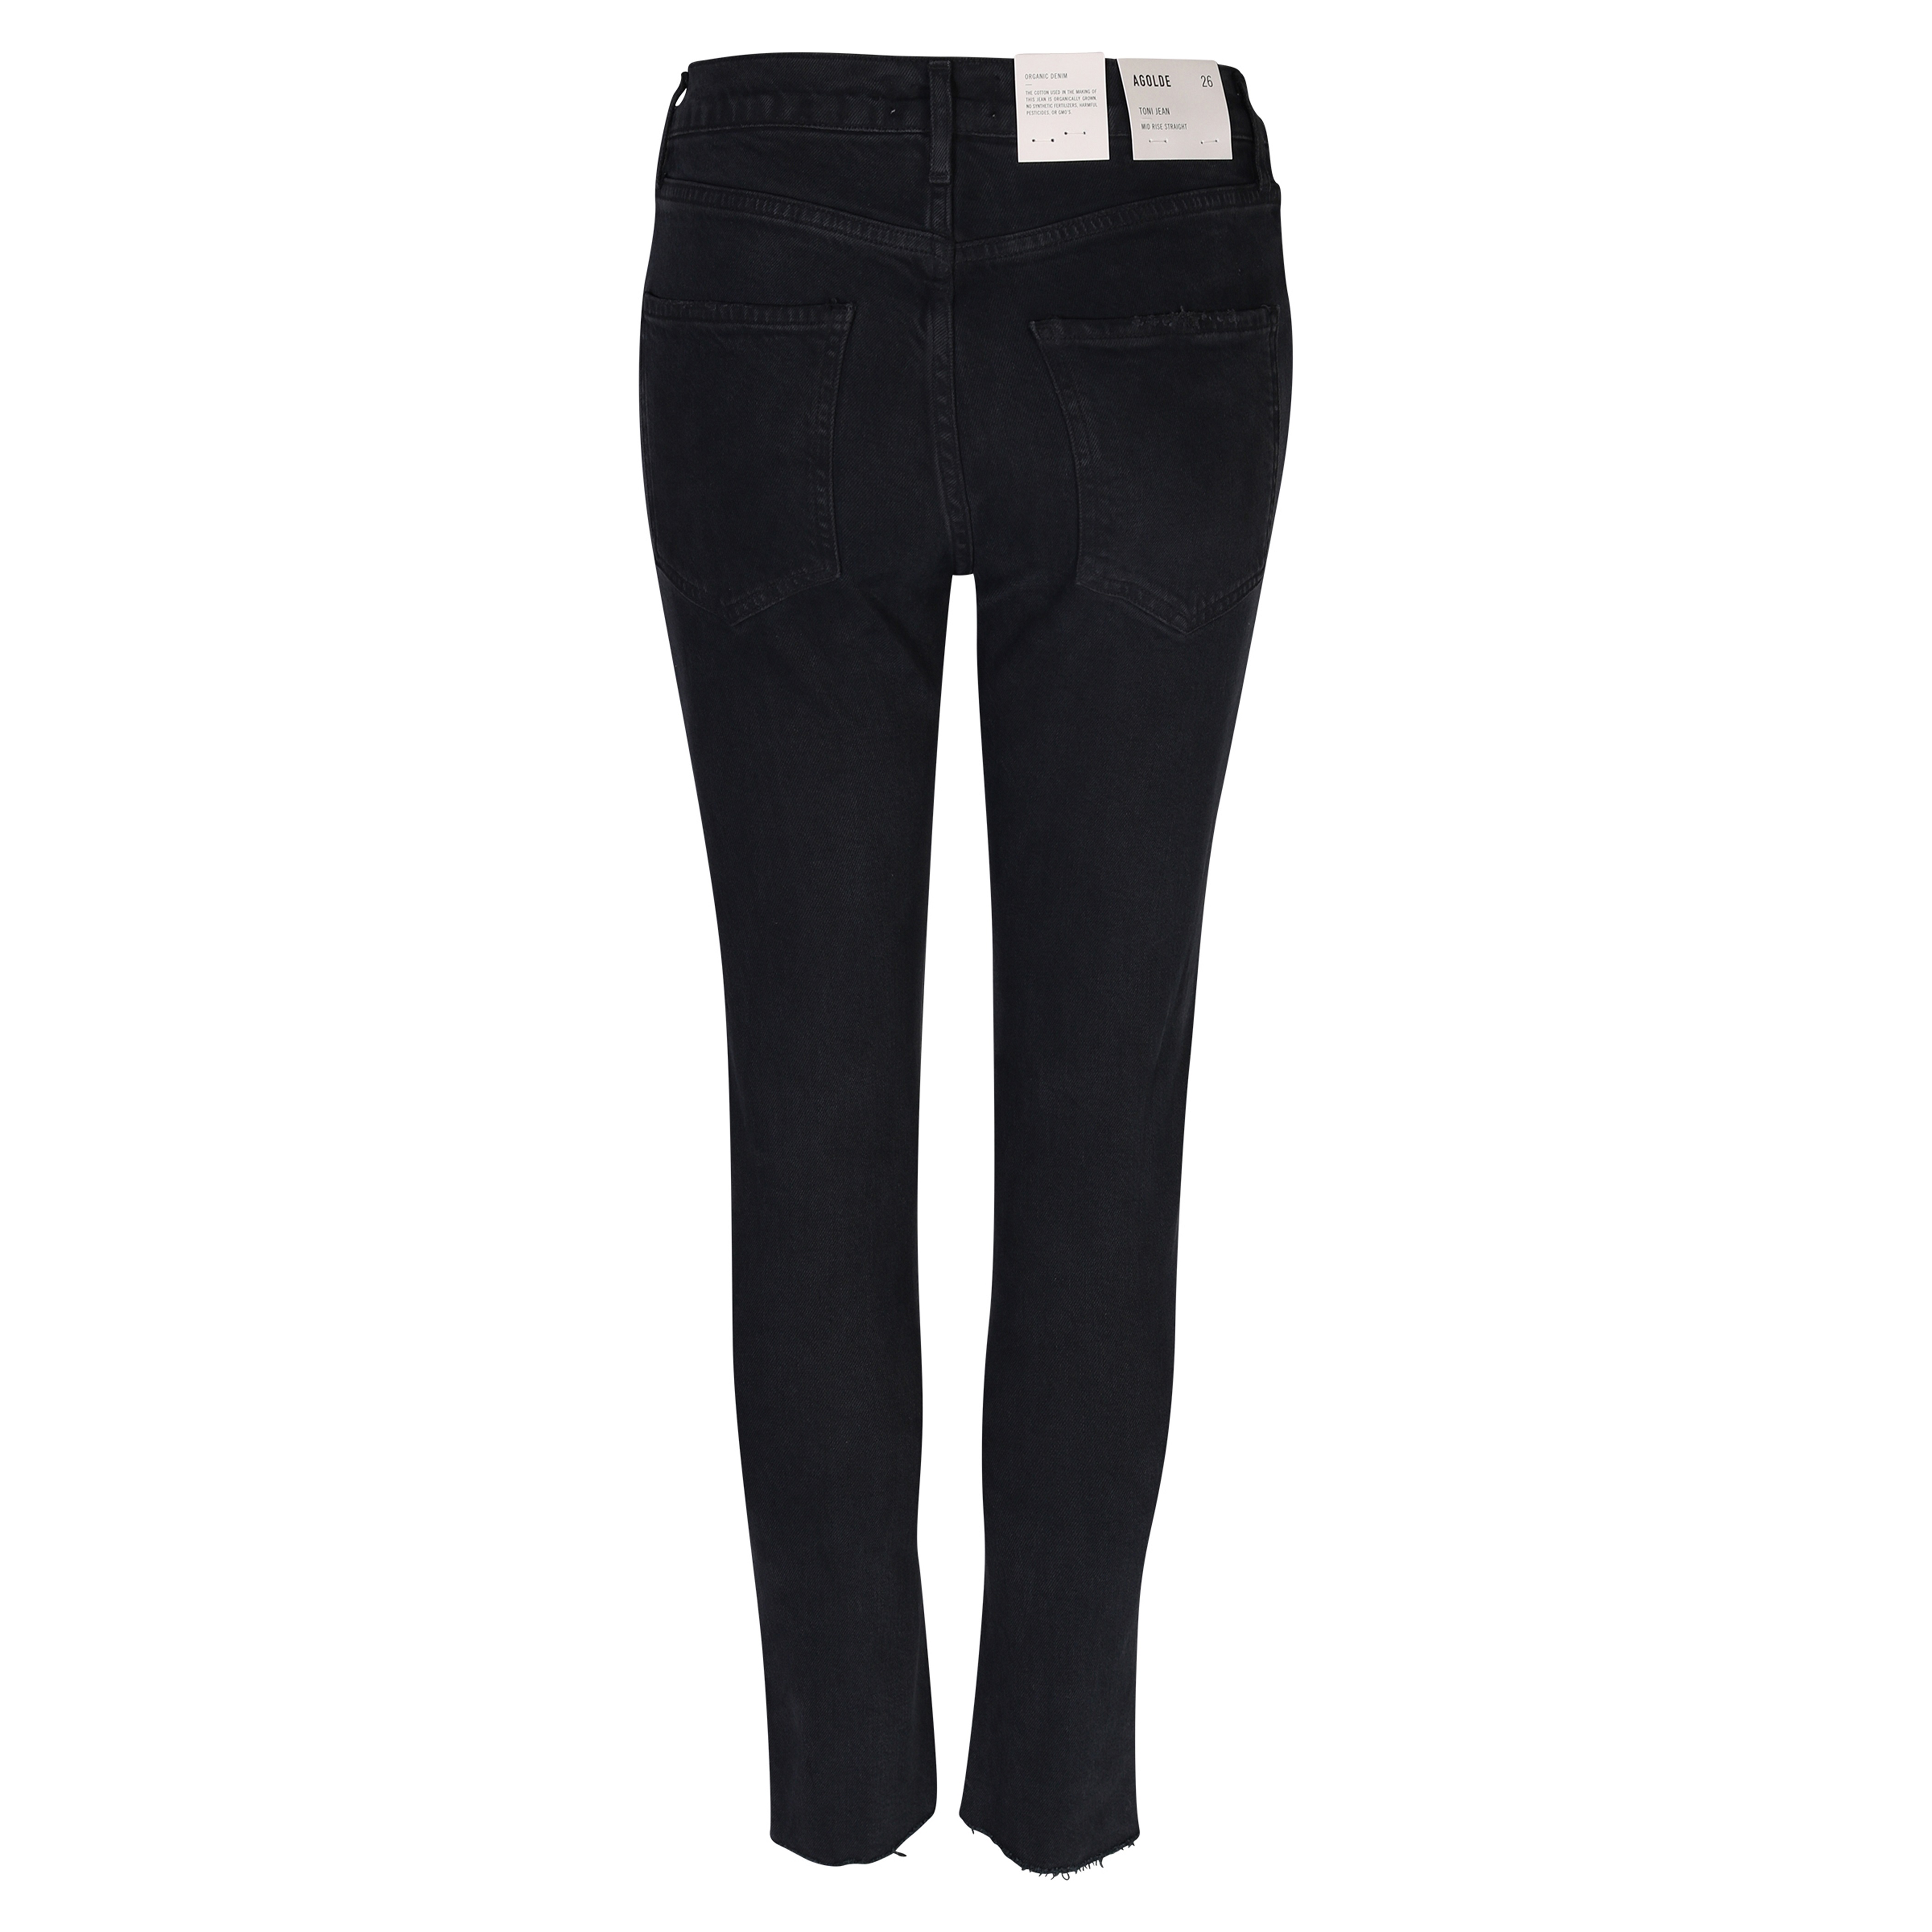 Agolde Jeans Toni Mid Rise Straight in Vintage Black 23